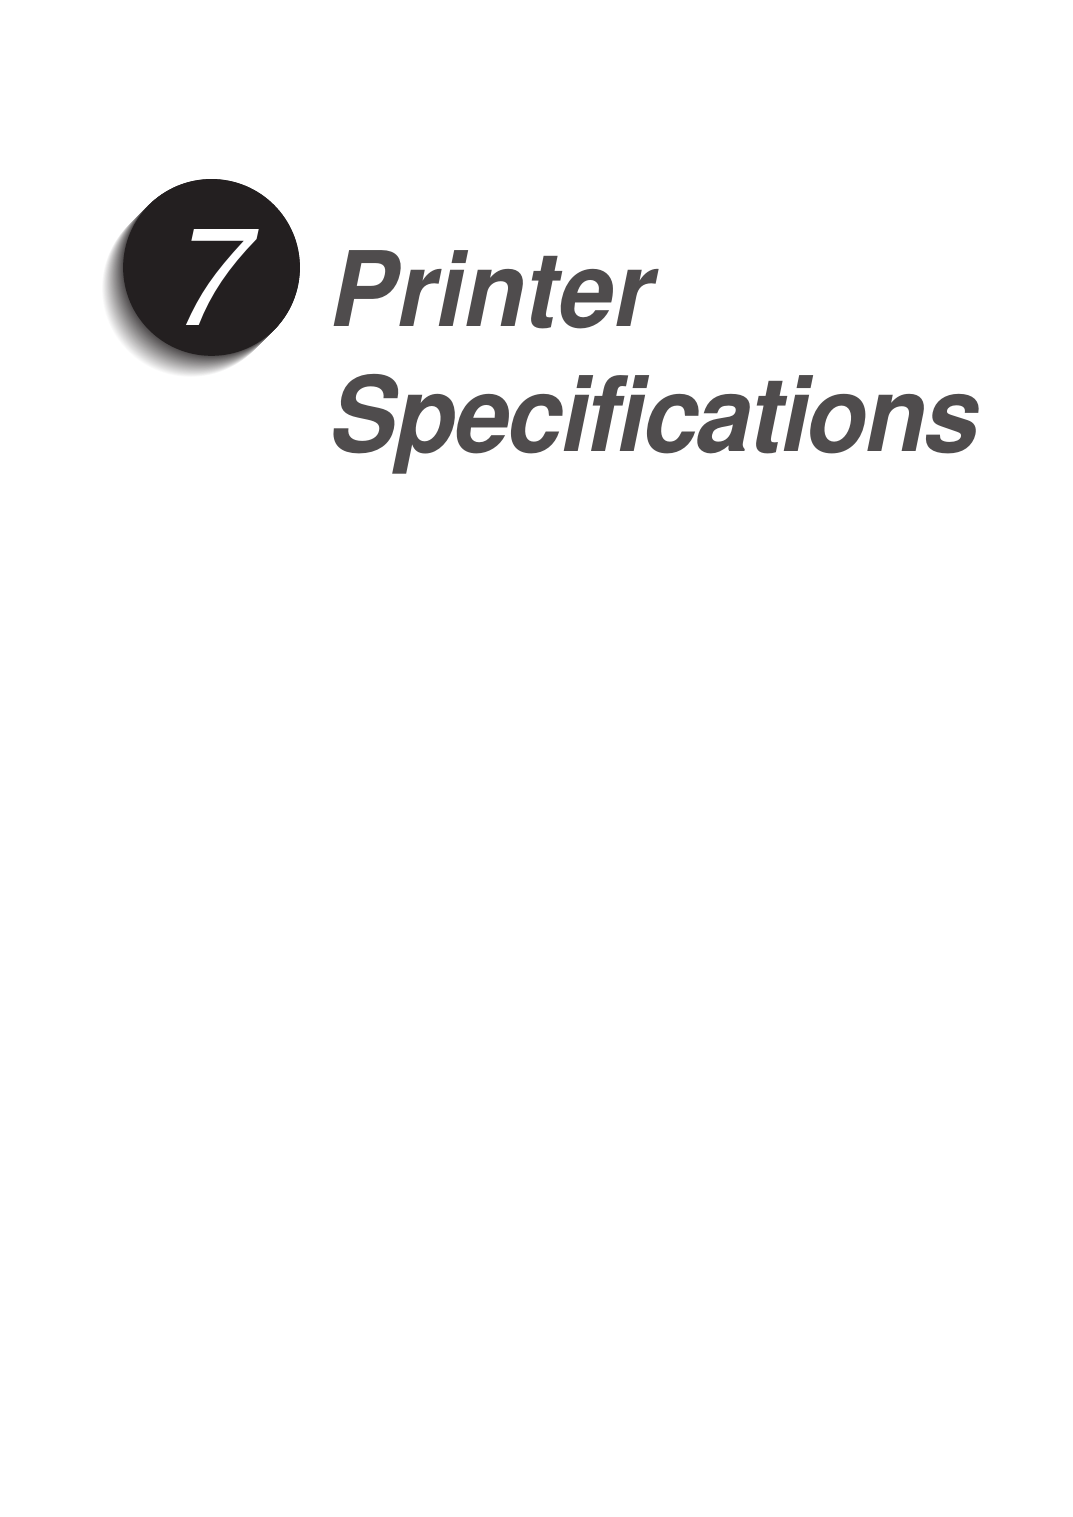 PrinterSpecifications7